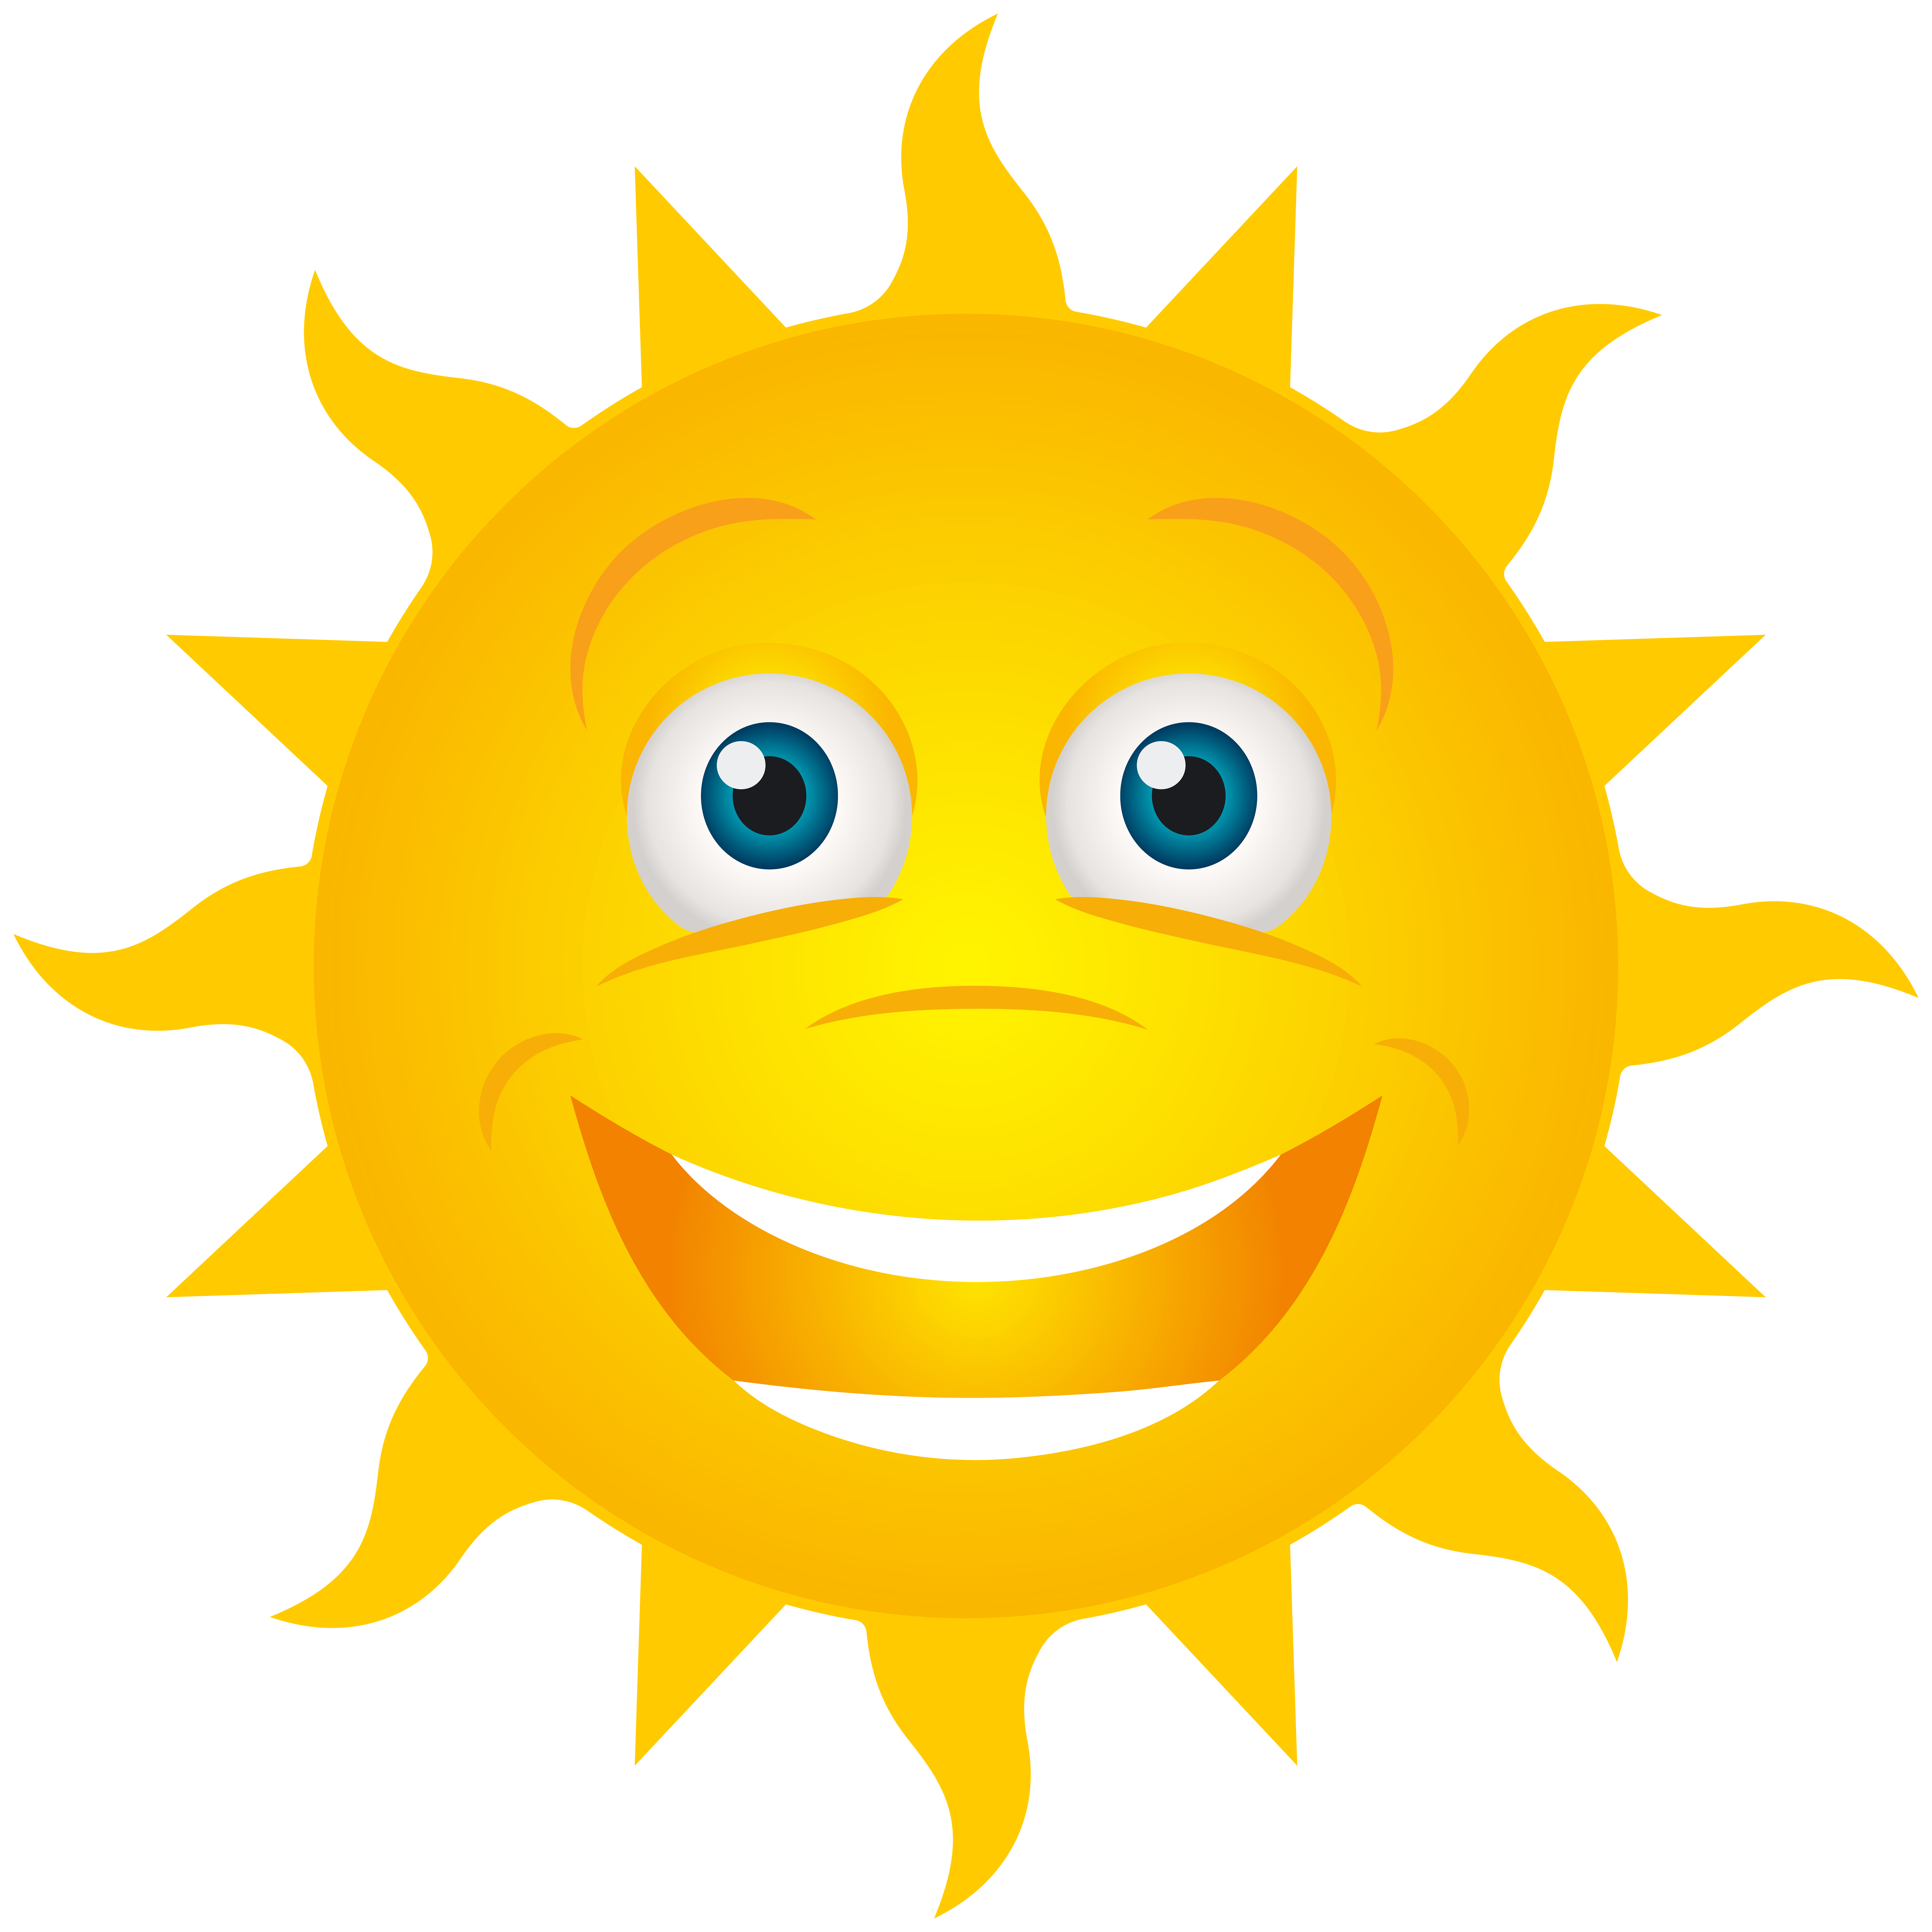 Smiling Sun Transparent Clip Art Image​ | Gallery Yopriceville -  High-Quality Free Images and Transparent PNG Clipart